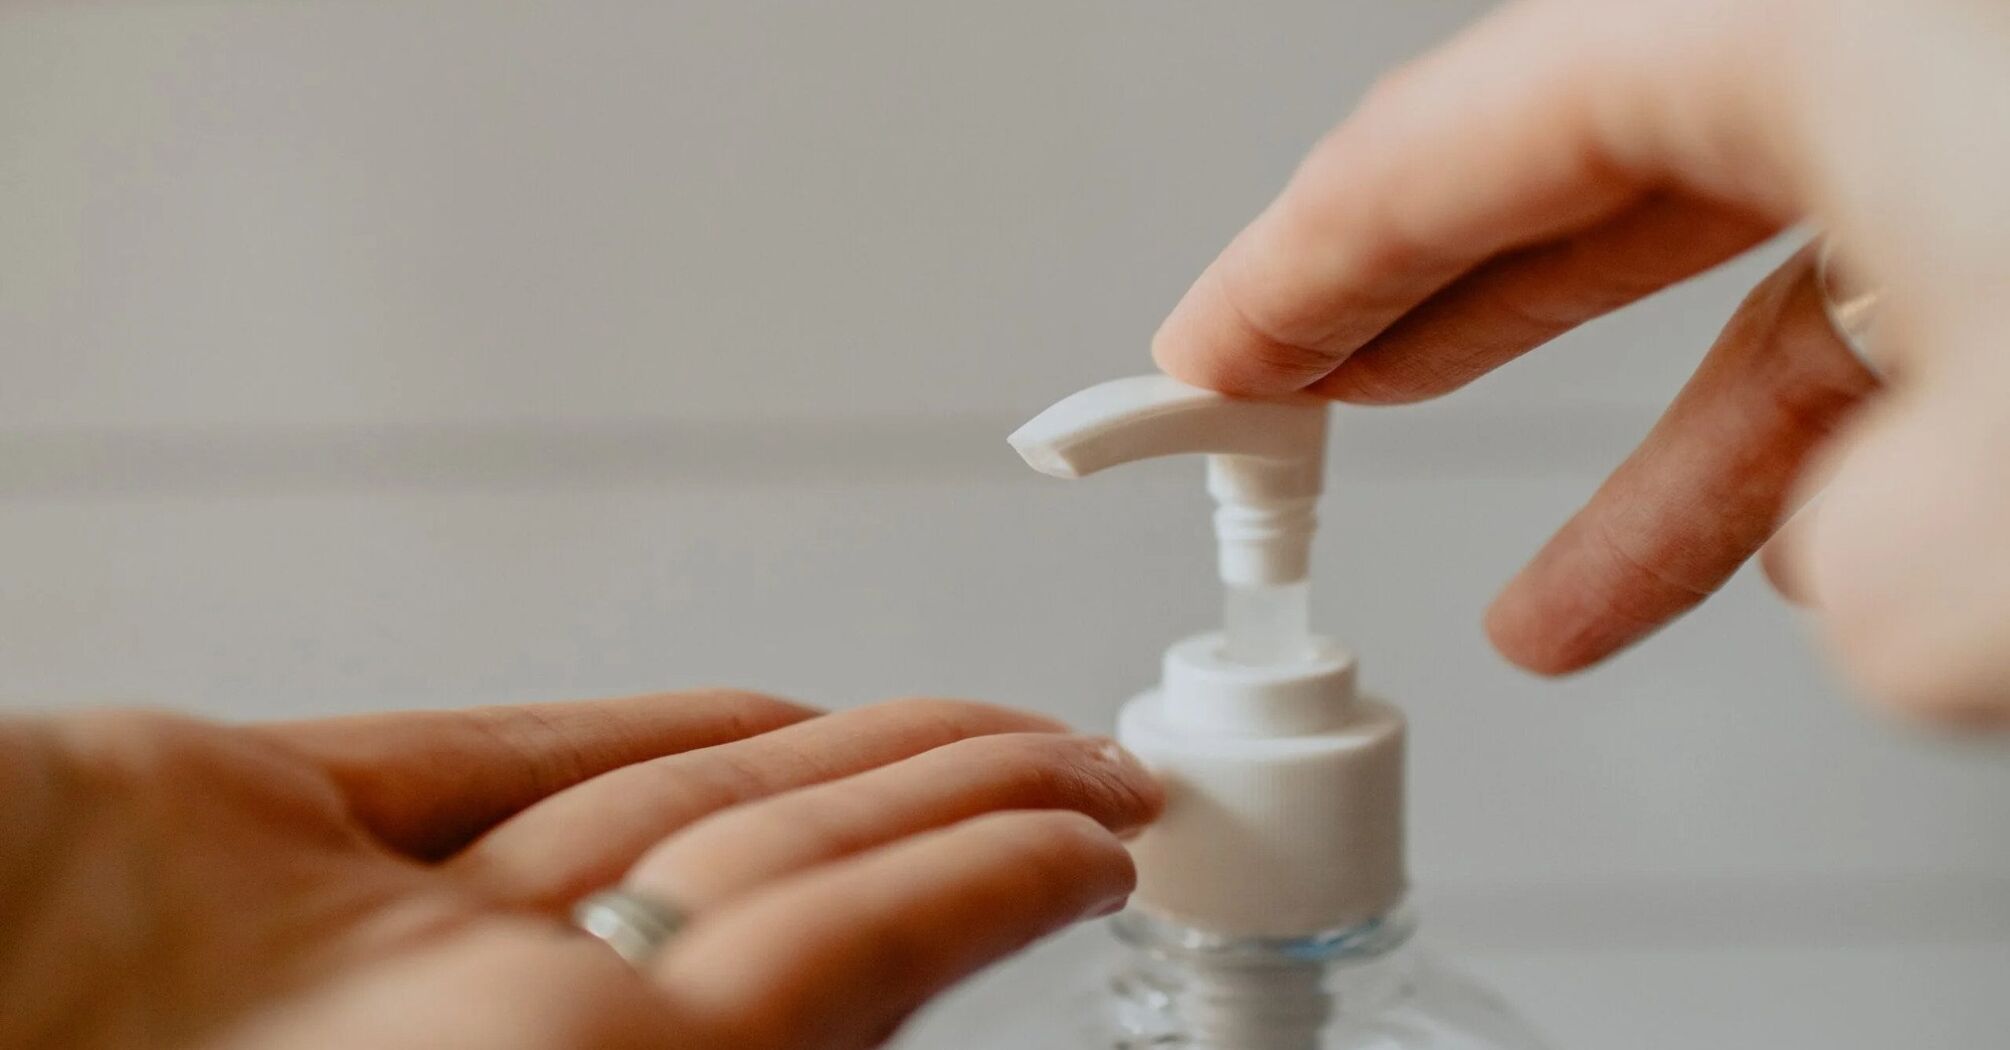 6 effective ways to use sanitizers at home